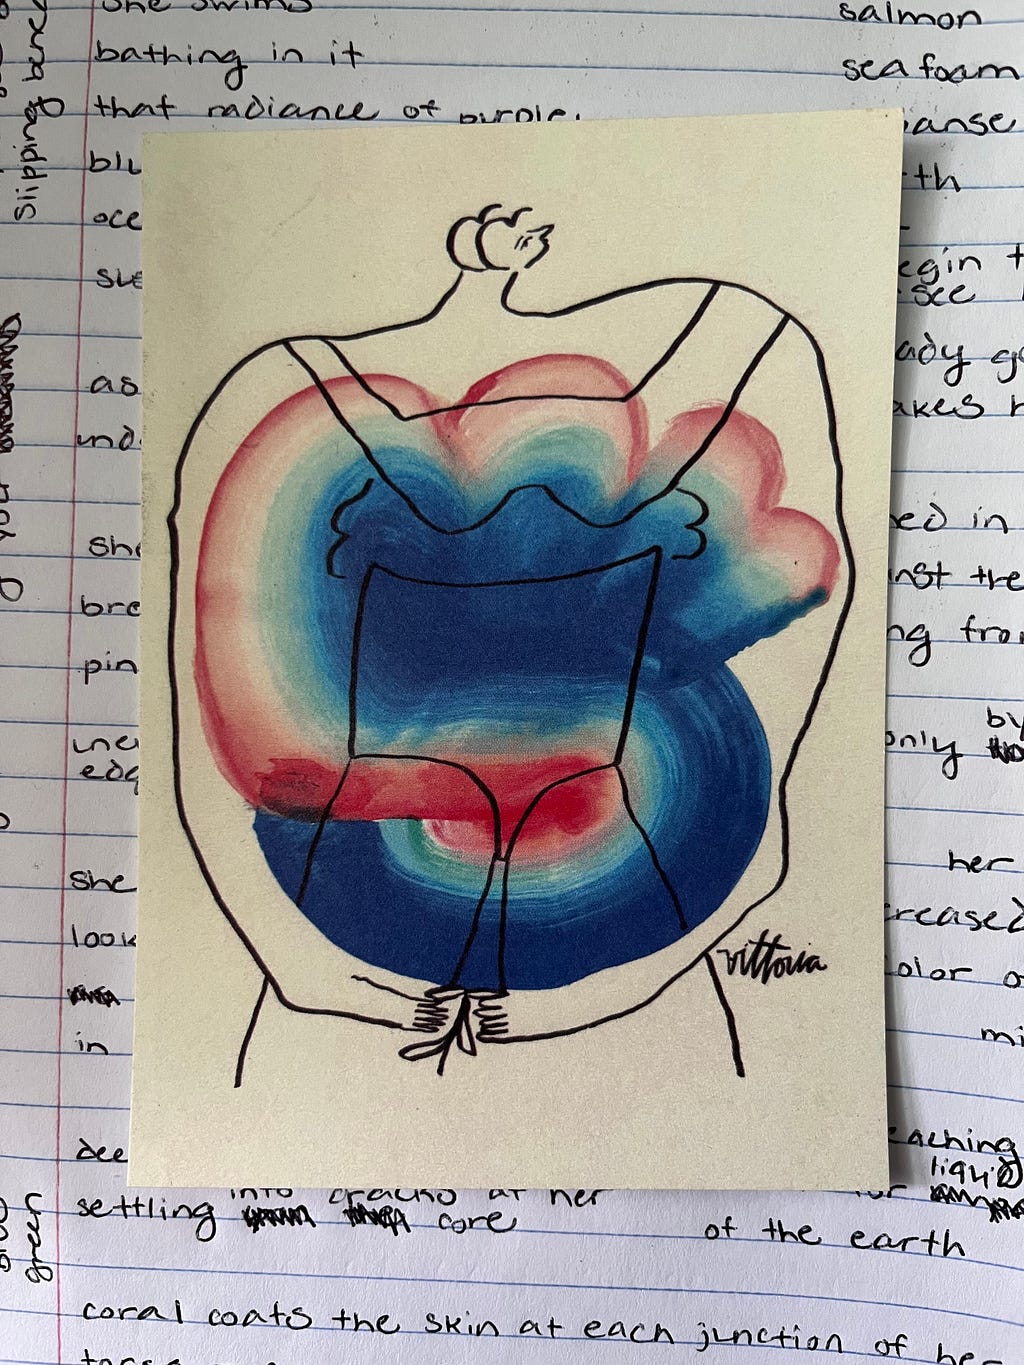 An drawing of a figure with watercolors (pink, red, pastel yellow, turquoise, deep blue) swirled on top of her. Amber Vittoria’s signature is written in the bottom right corner. The drawing has been photographed on top of Cami’s first draft of this poem.